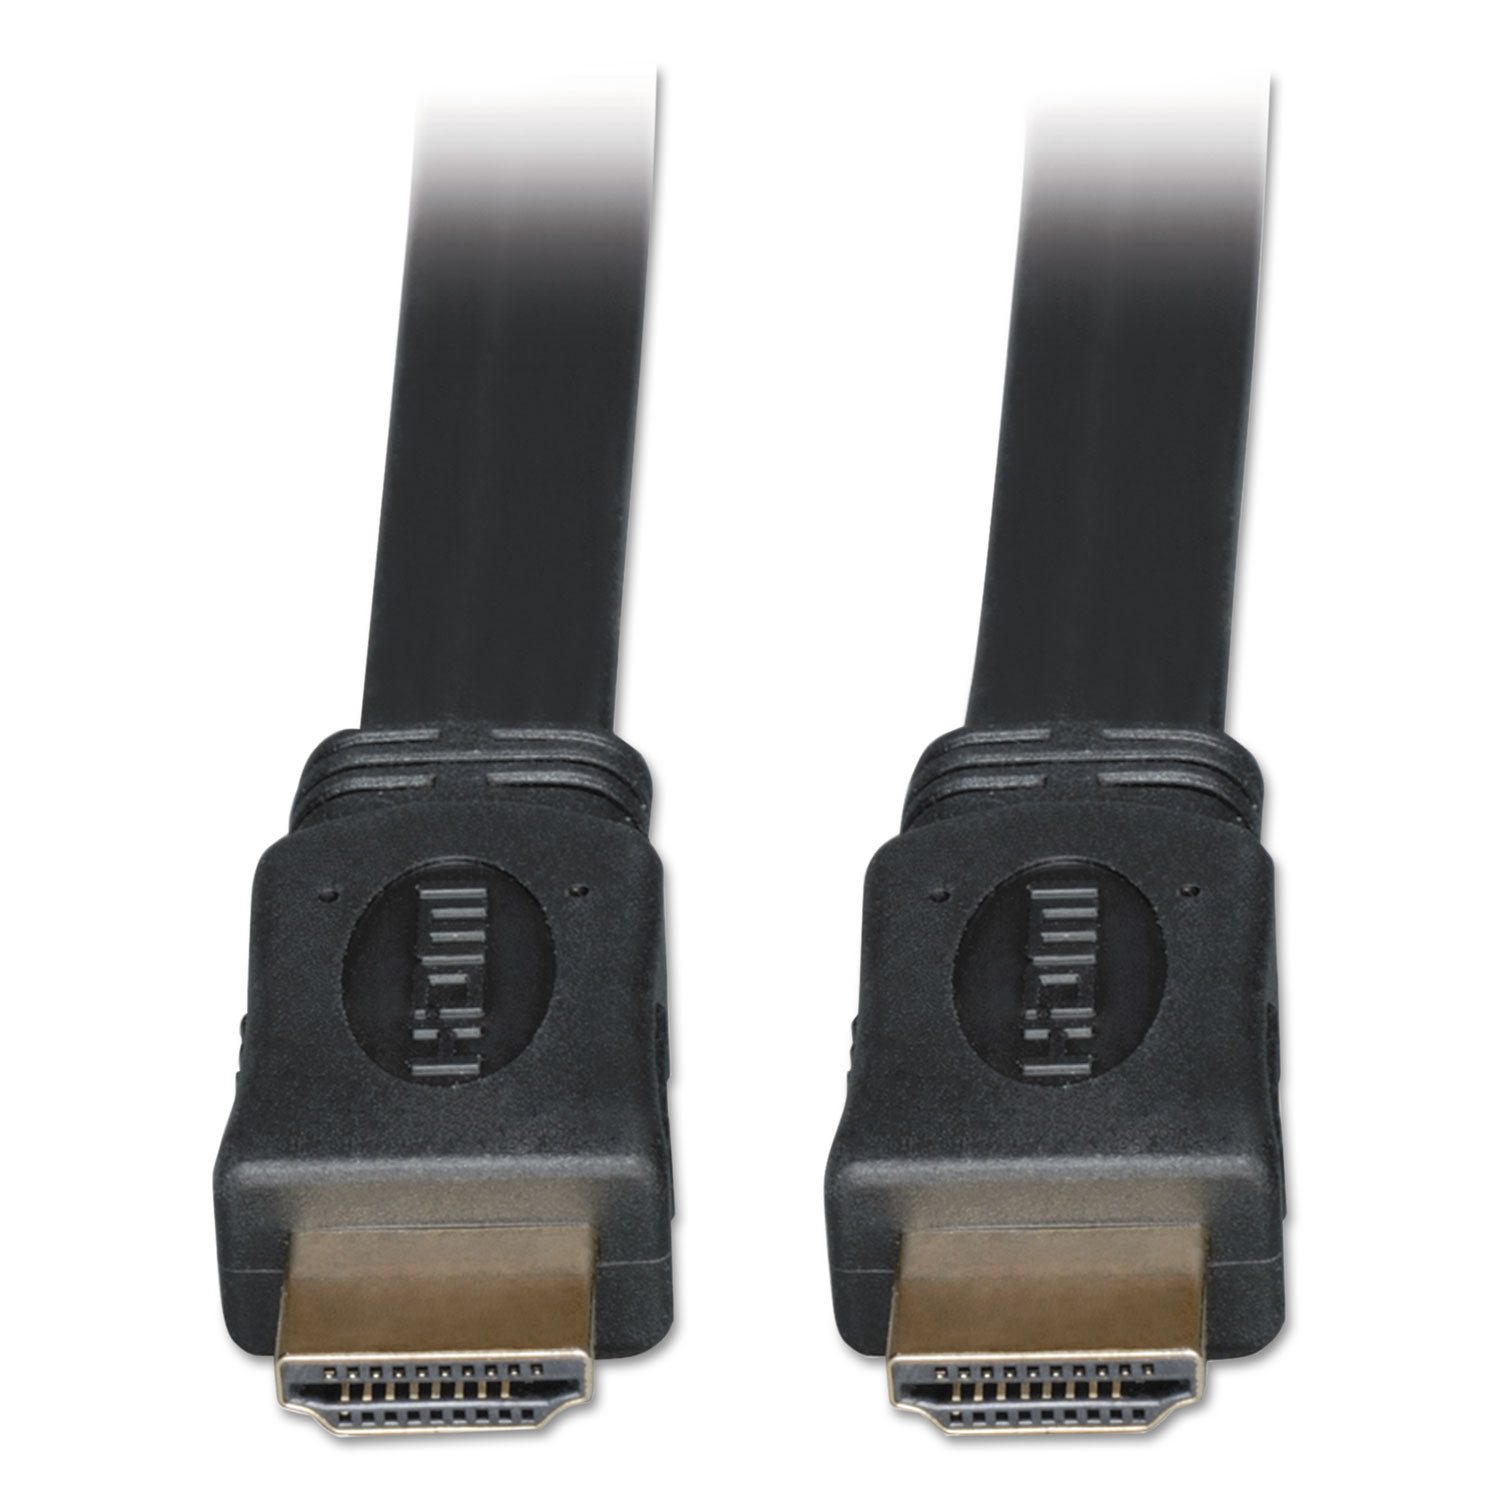 P568-003-FL 3ft Flat HDMI Gold Cable HDMI M/M, 3